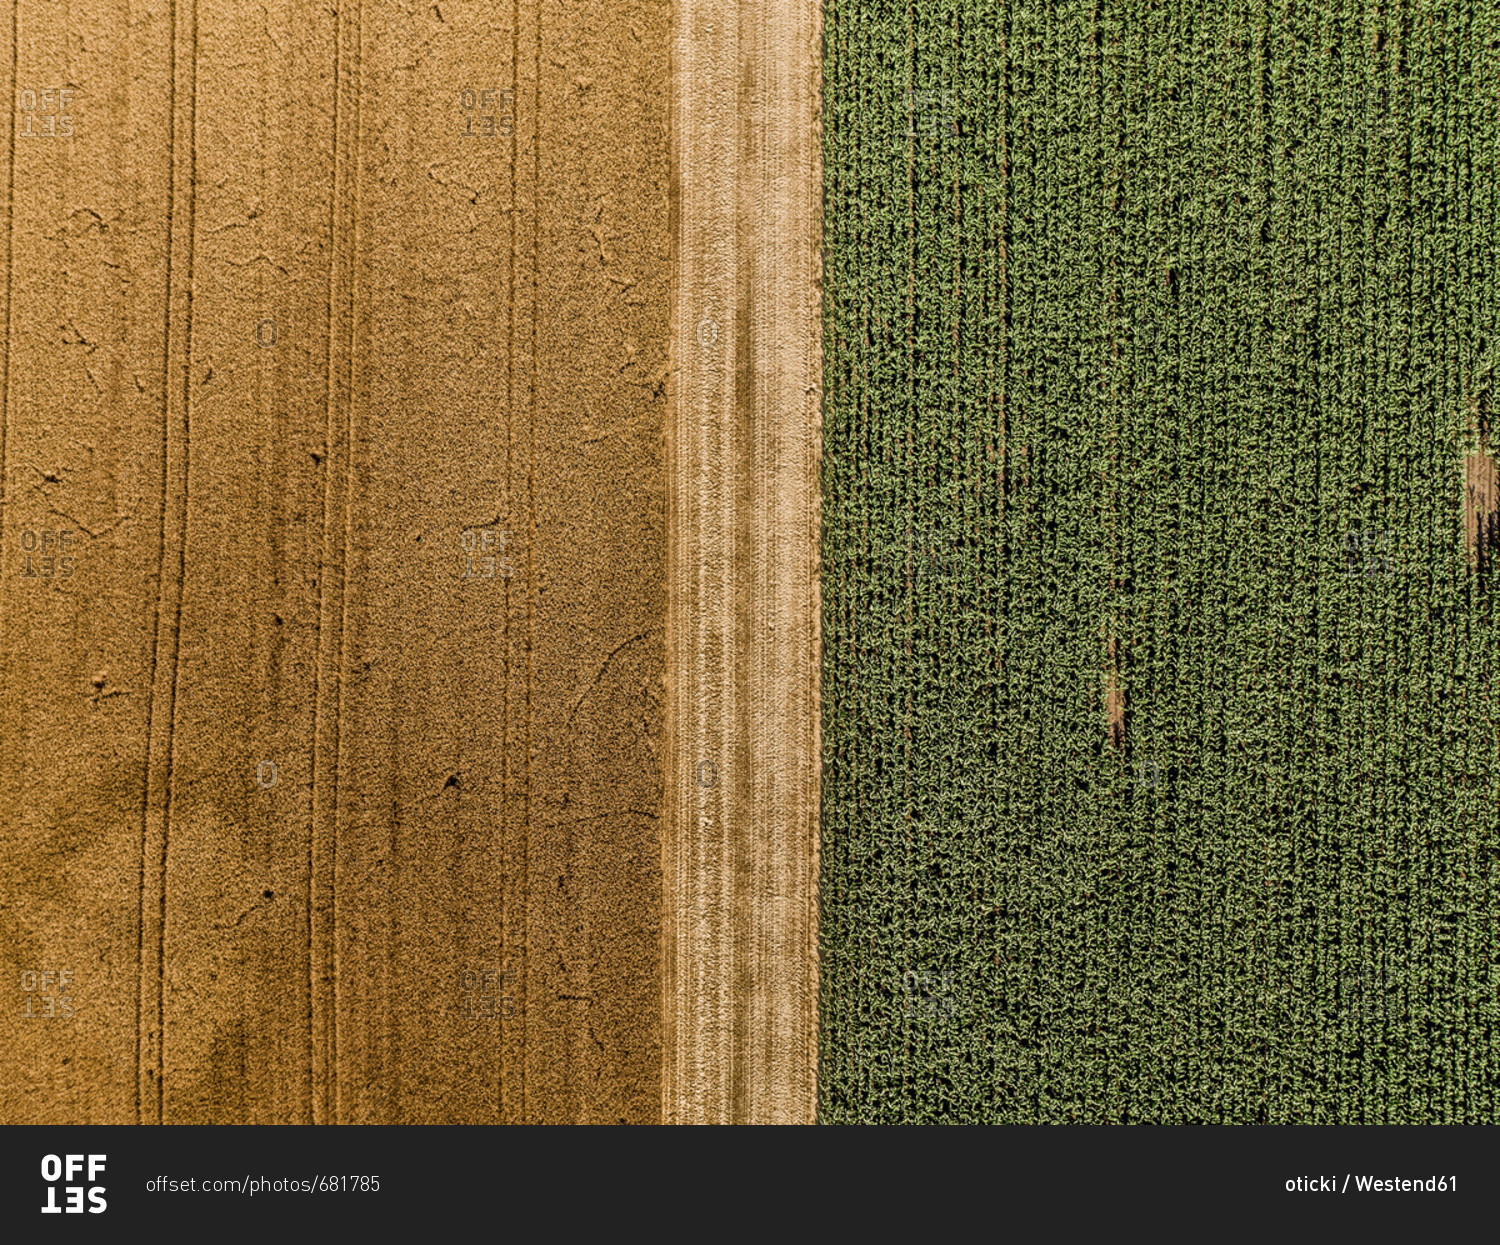 Serbia- Vojvodina- agricultural fields- aerial view at summer season